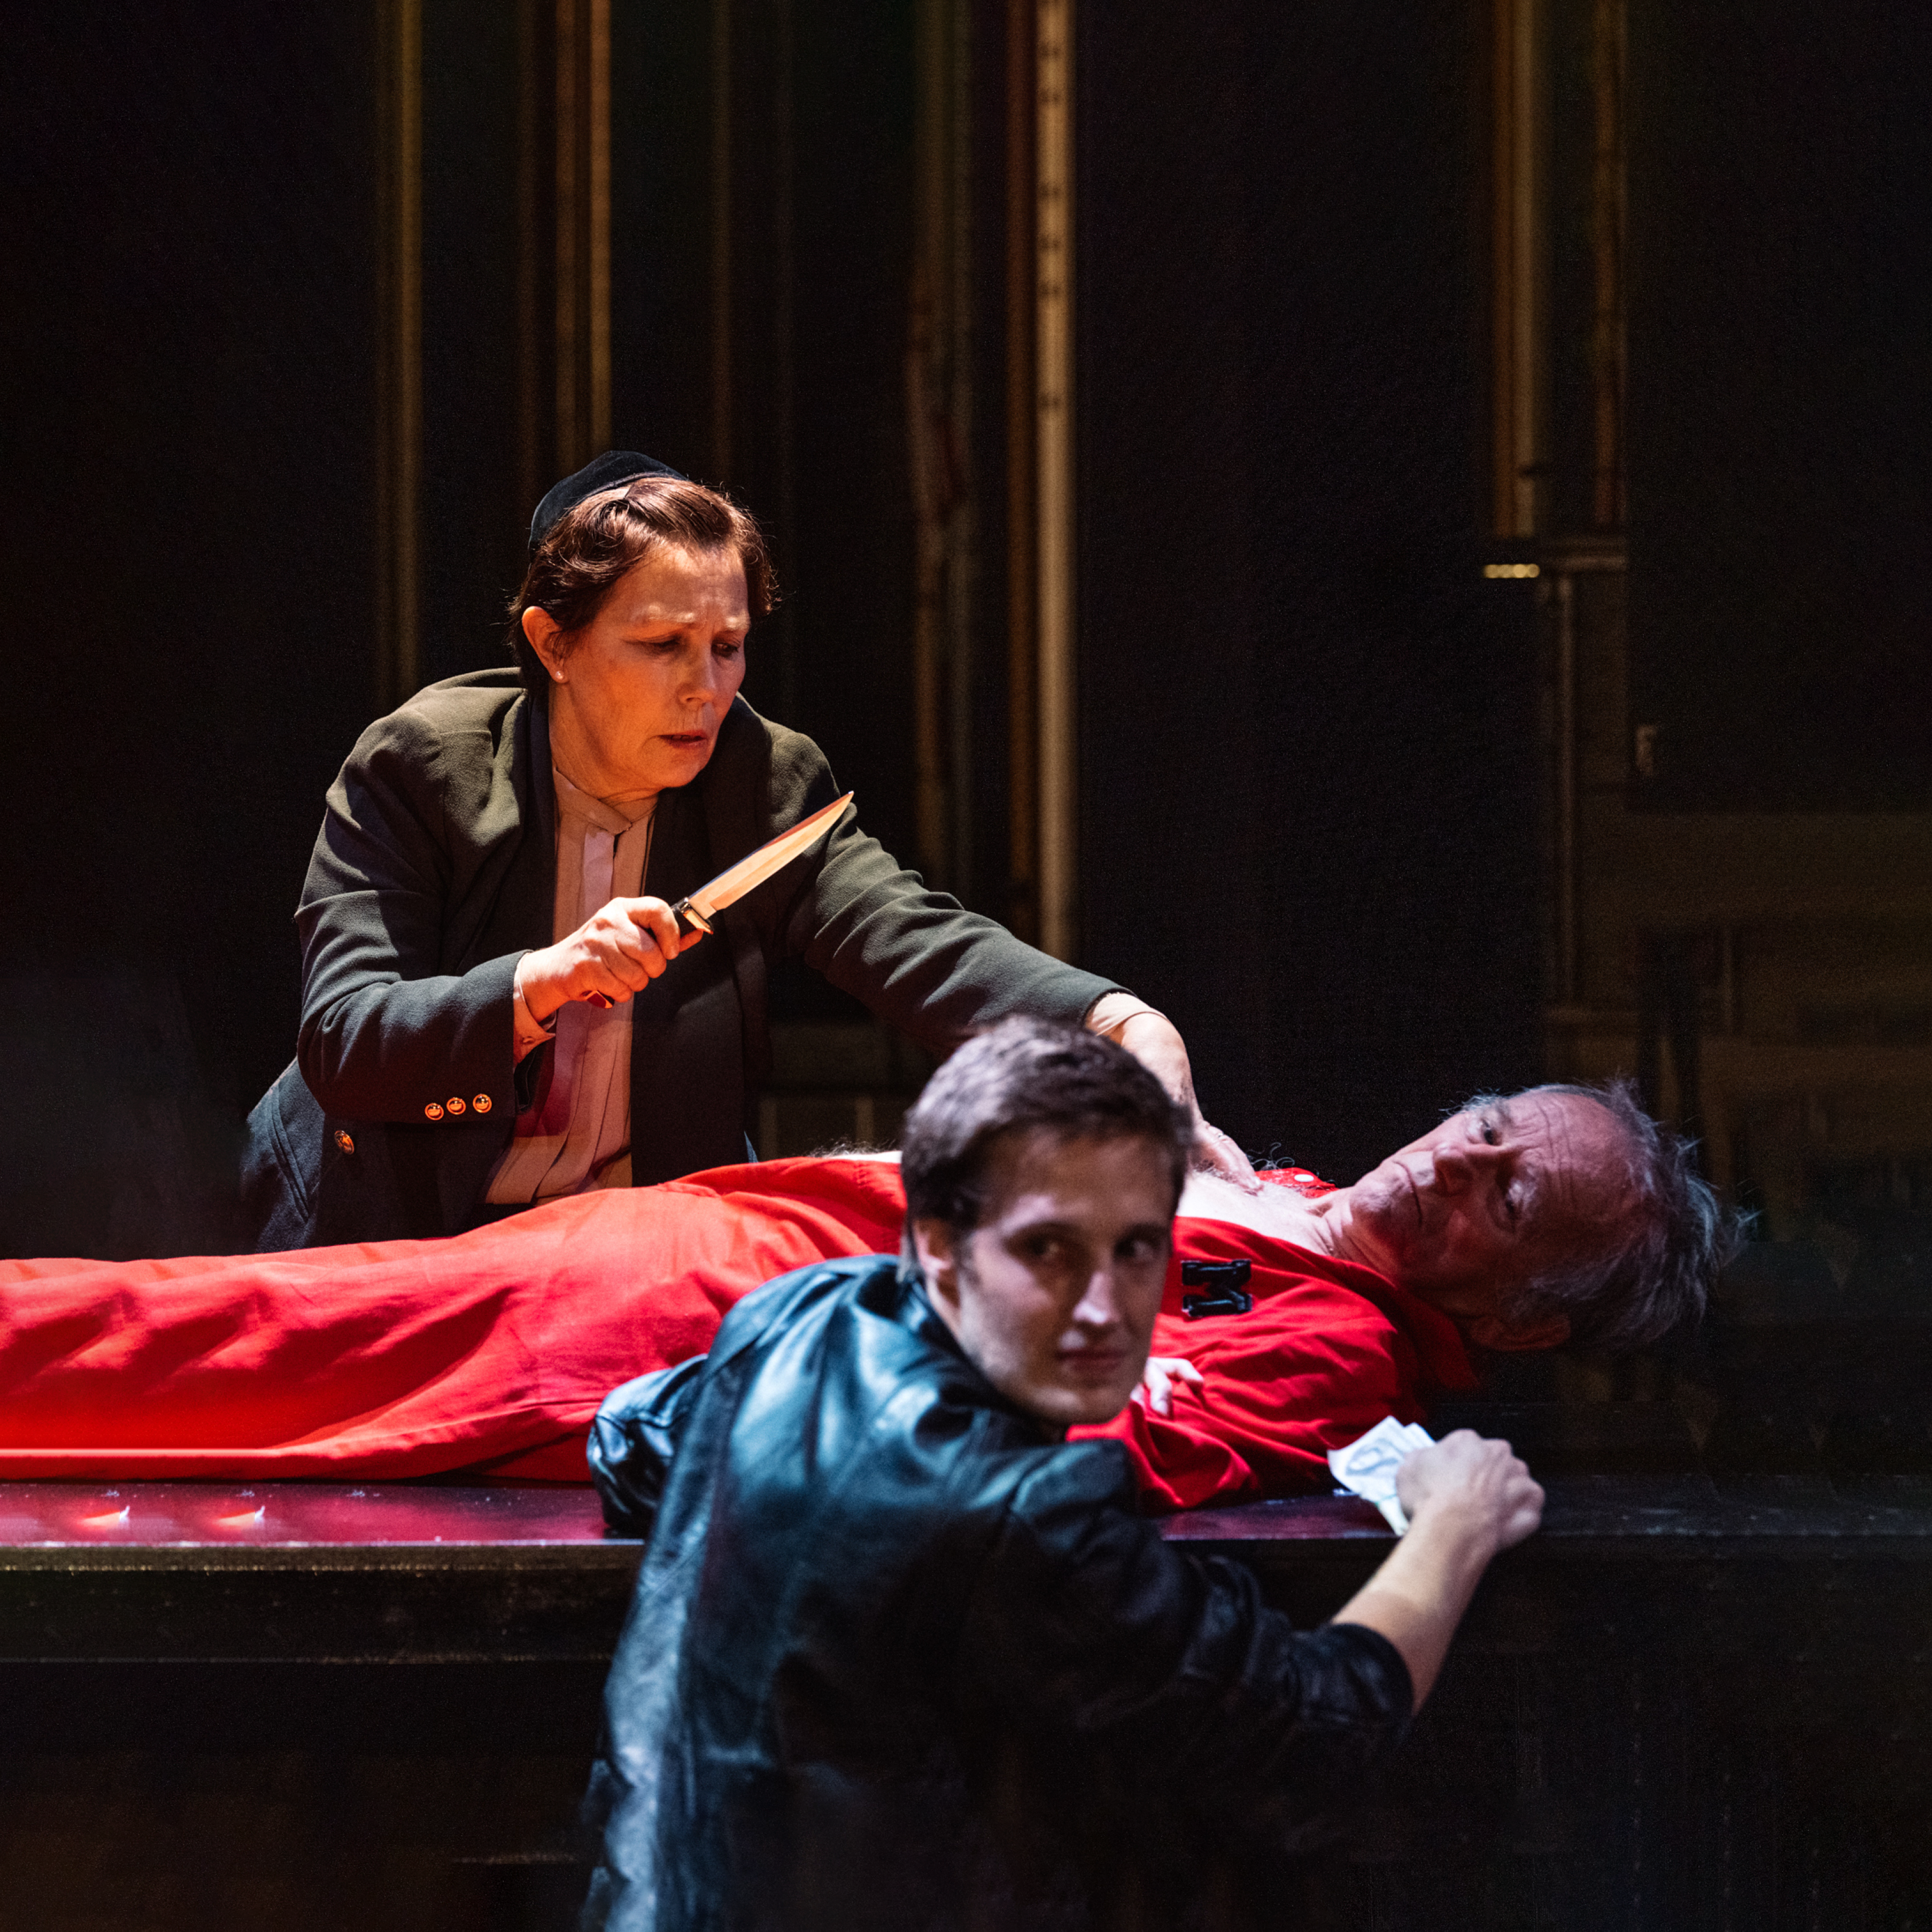 Promotional image of The Merchant Of Venice Symposium for Seymour Centres Arts Education Program depicting a man lying on a bed with a woman standing over holding a knife, a boy sits in the foreground looking past the camera.